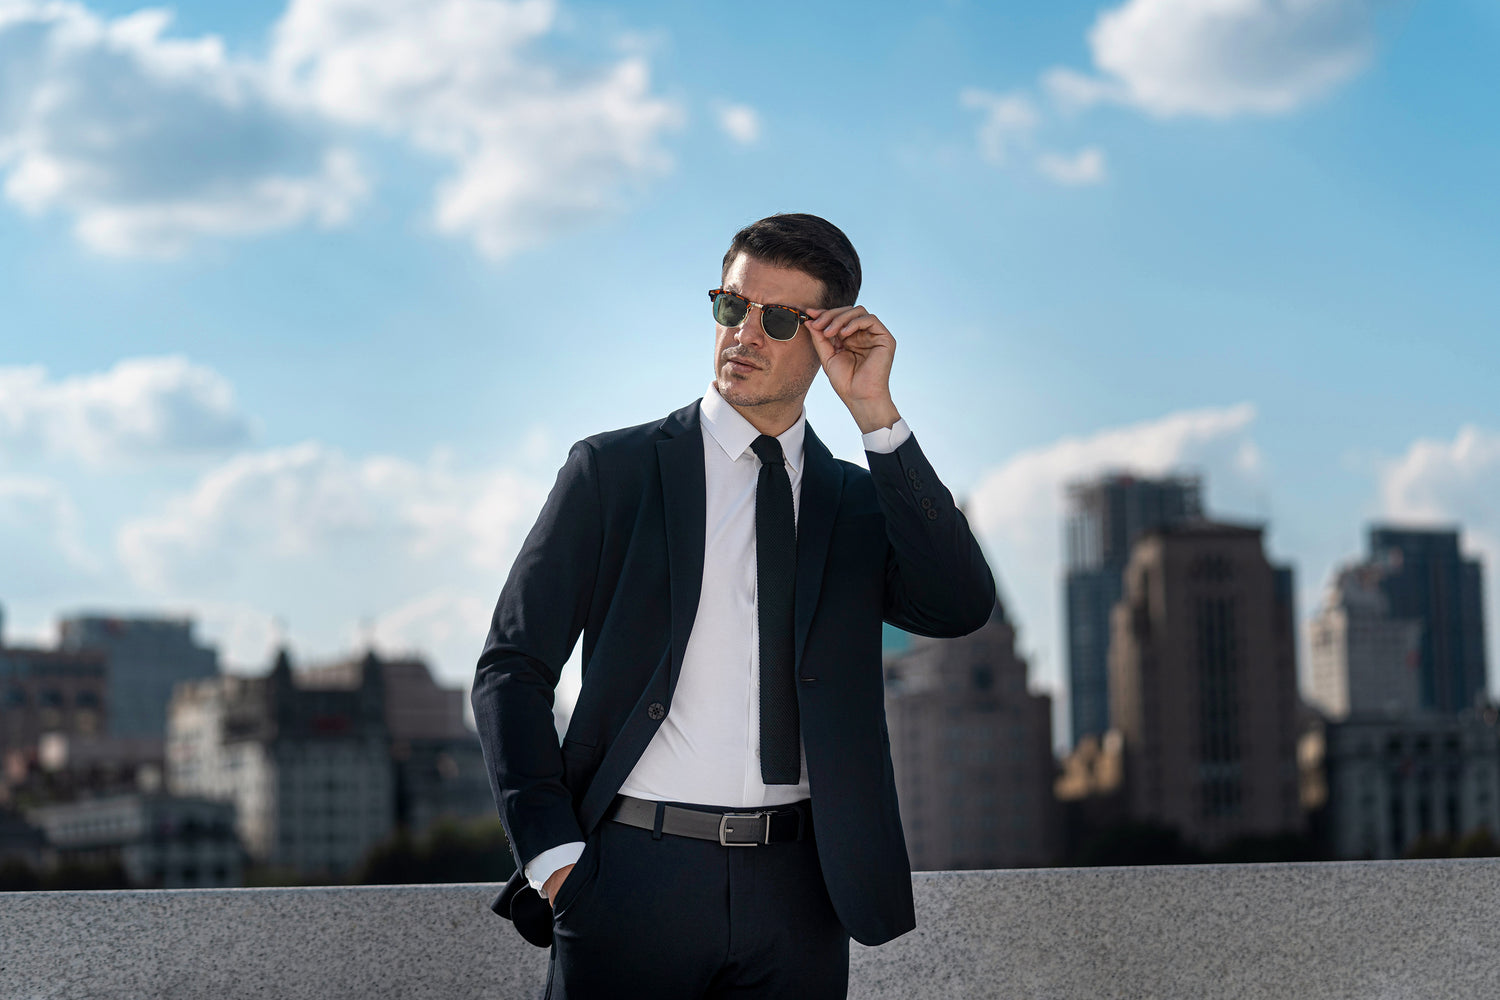 Casual, Smart Casual, and Business Casual Dress Codes: What’s the Difference?